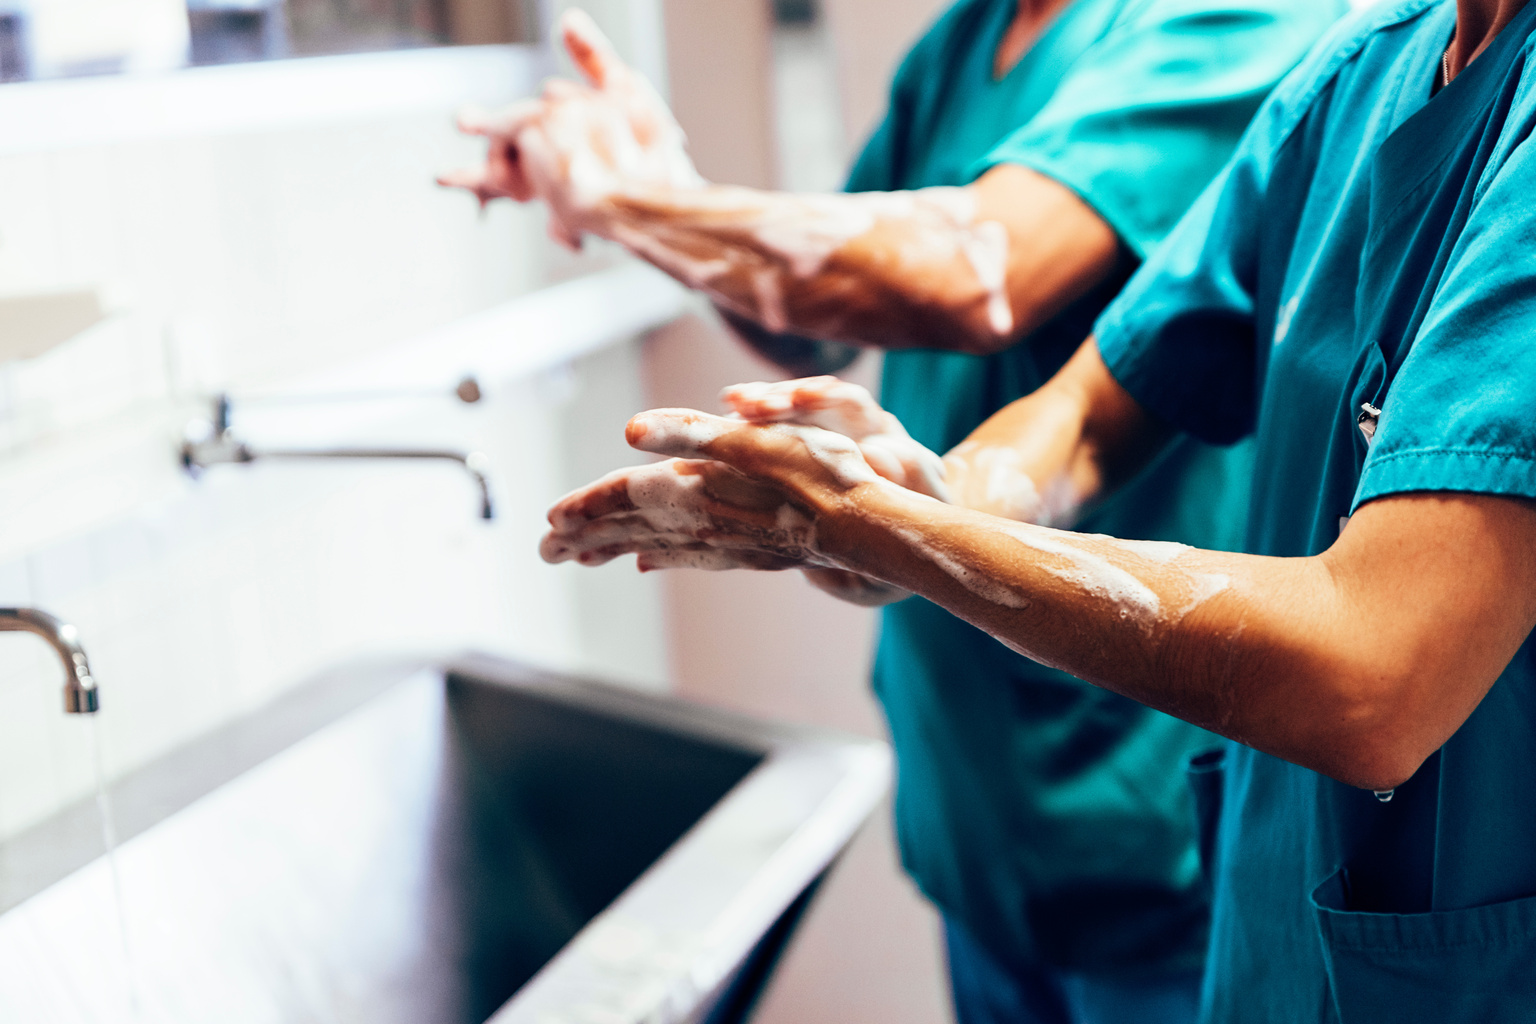 Two new recommendations for preventing healthcare-associated infections with hand hygiene